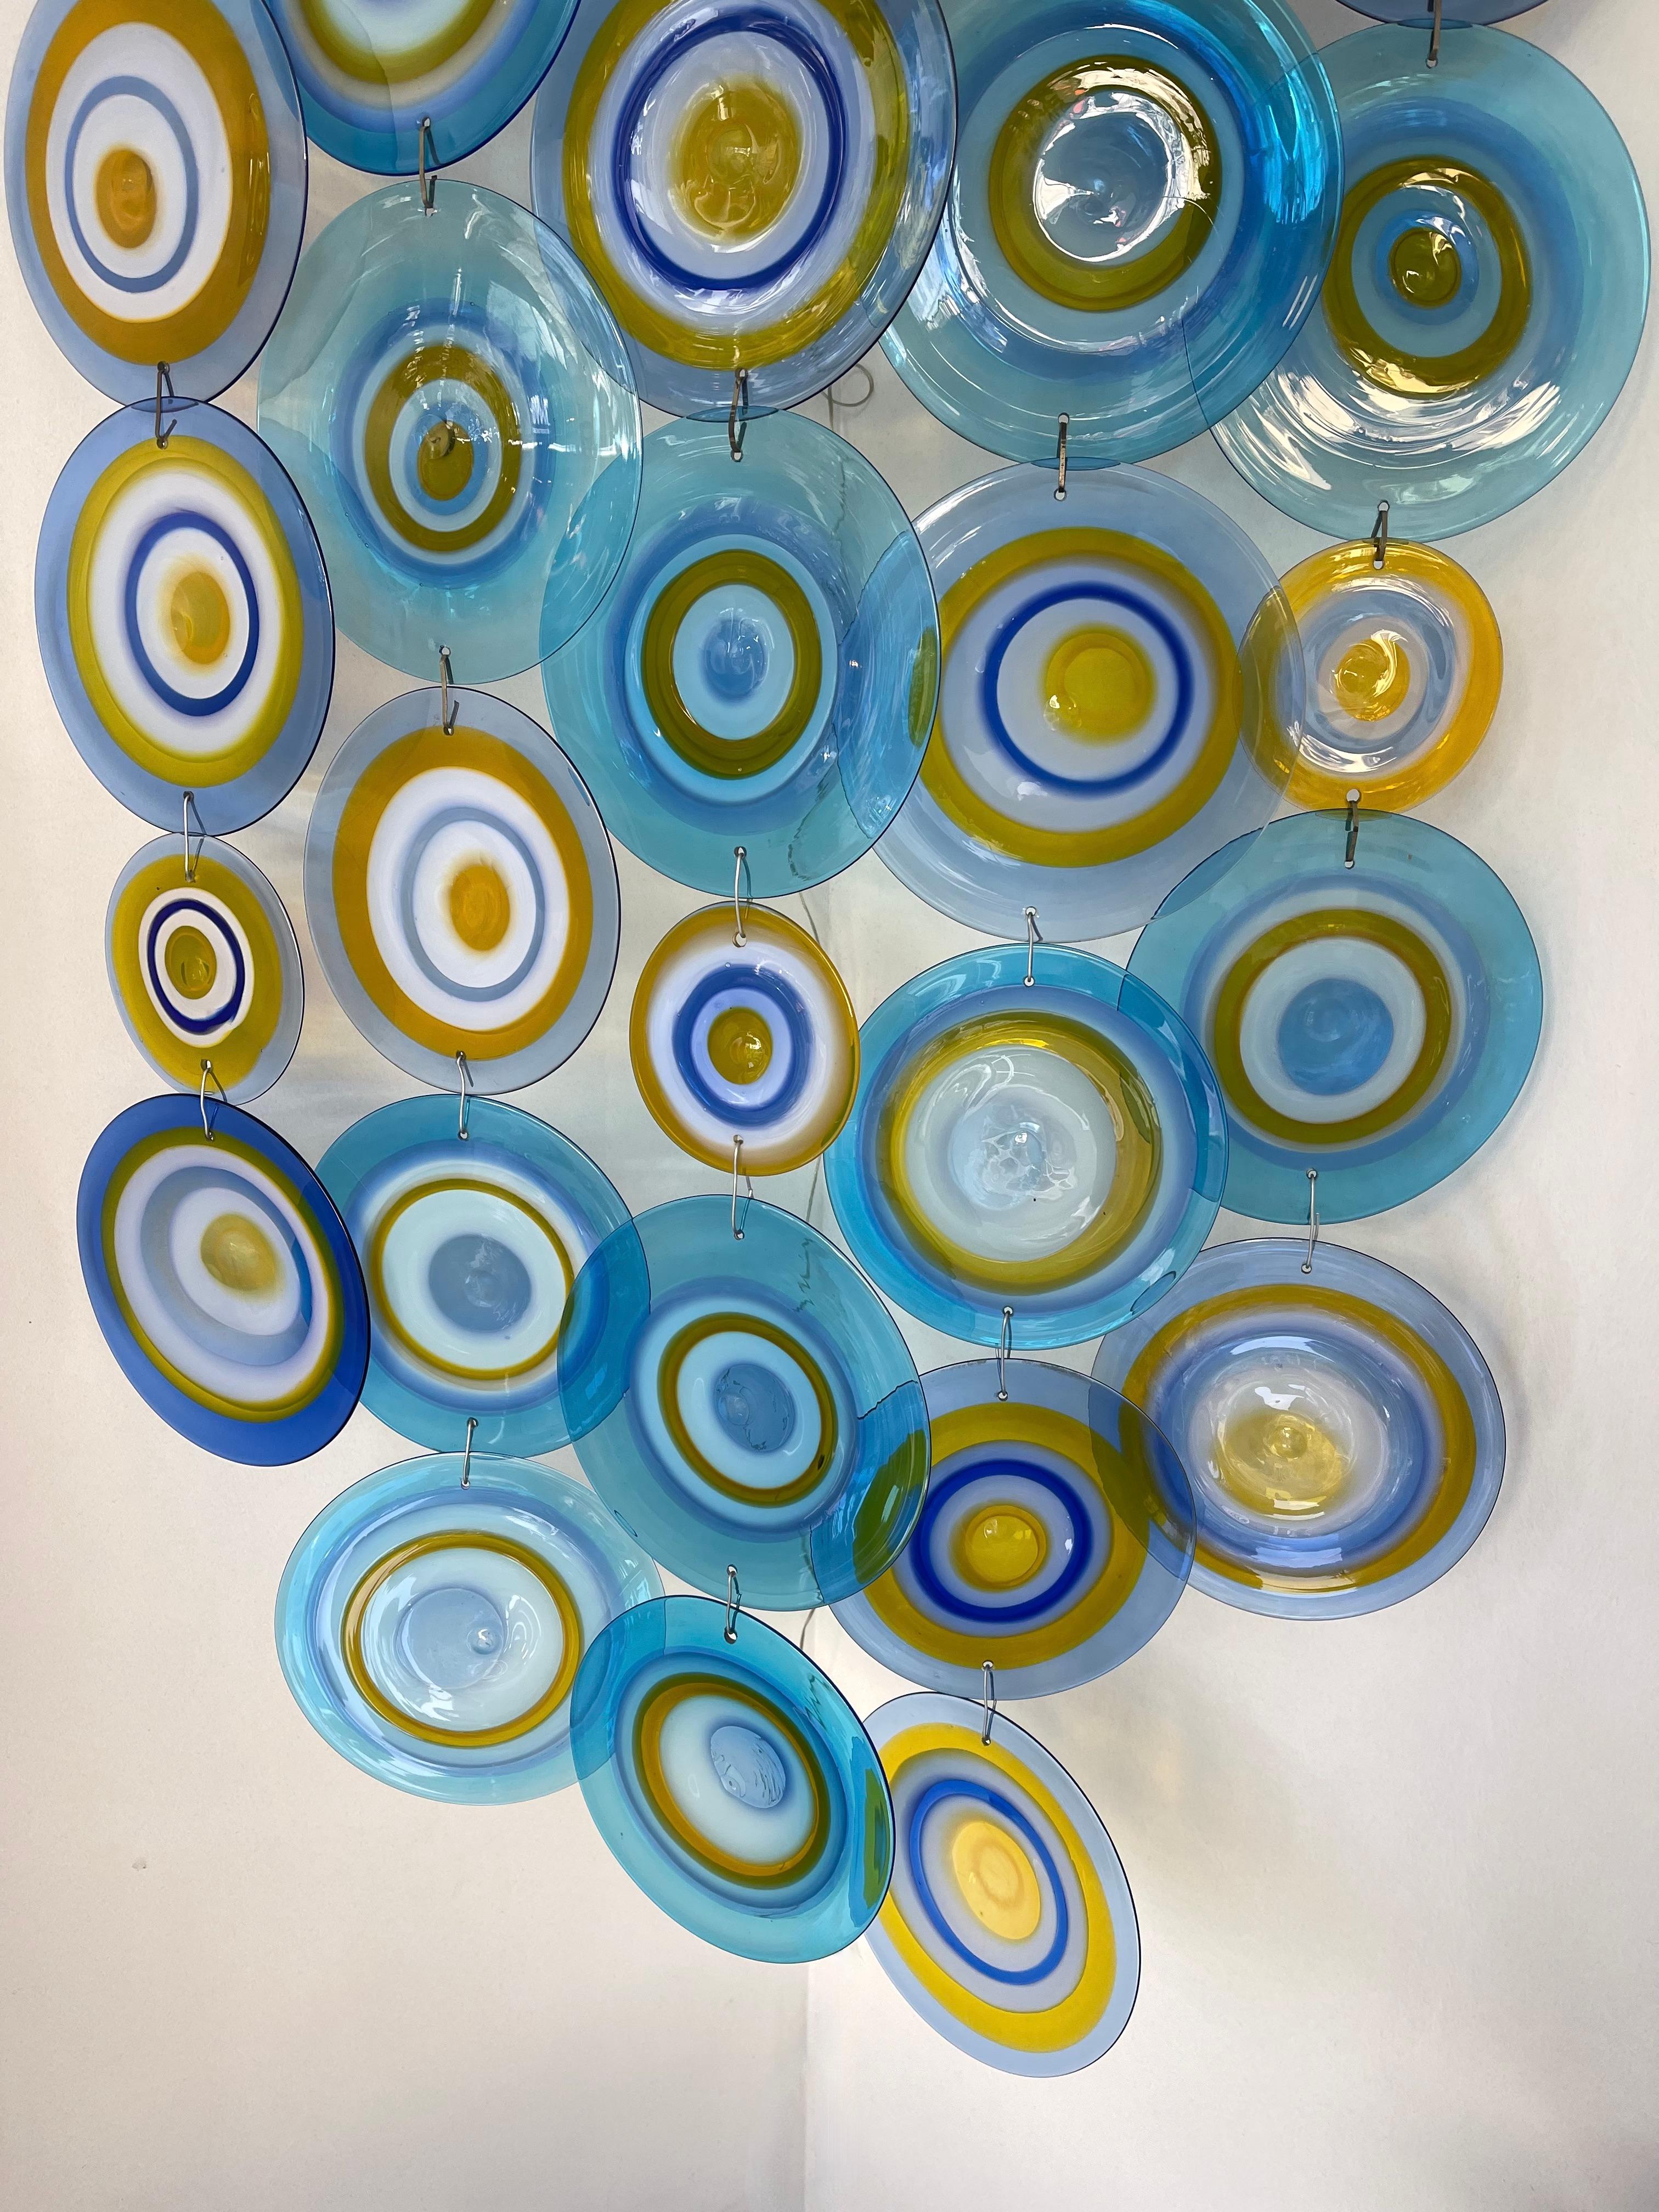 Very rare oversize extra extra large long corner wall lightning lamp pannel sconce in blue, yellow and white murano glass disc by the italian master glass artist Gianmaria Potenza for the Murano manufacture La Murrina. This piece is designed to be